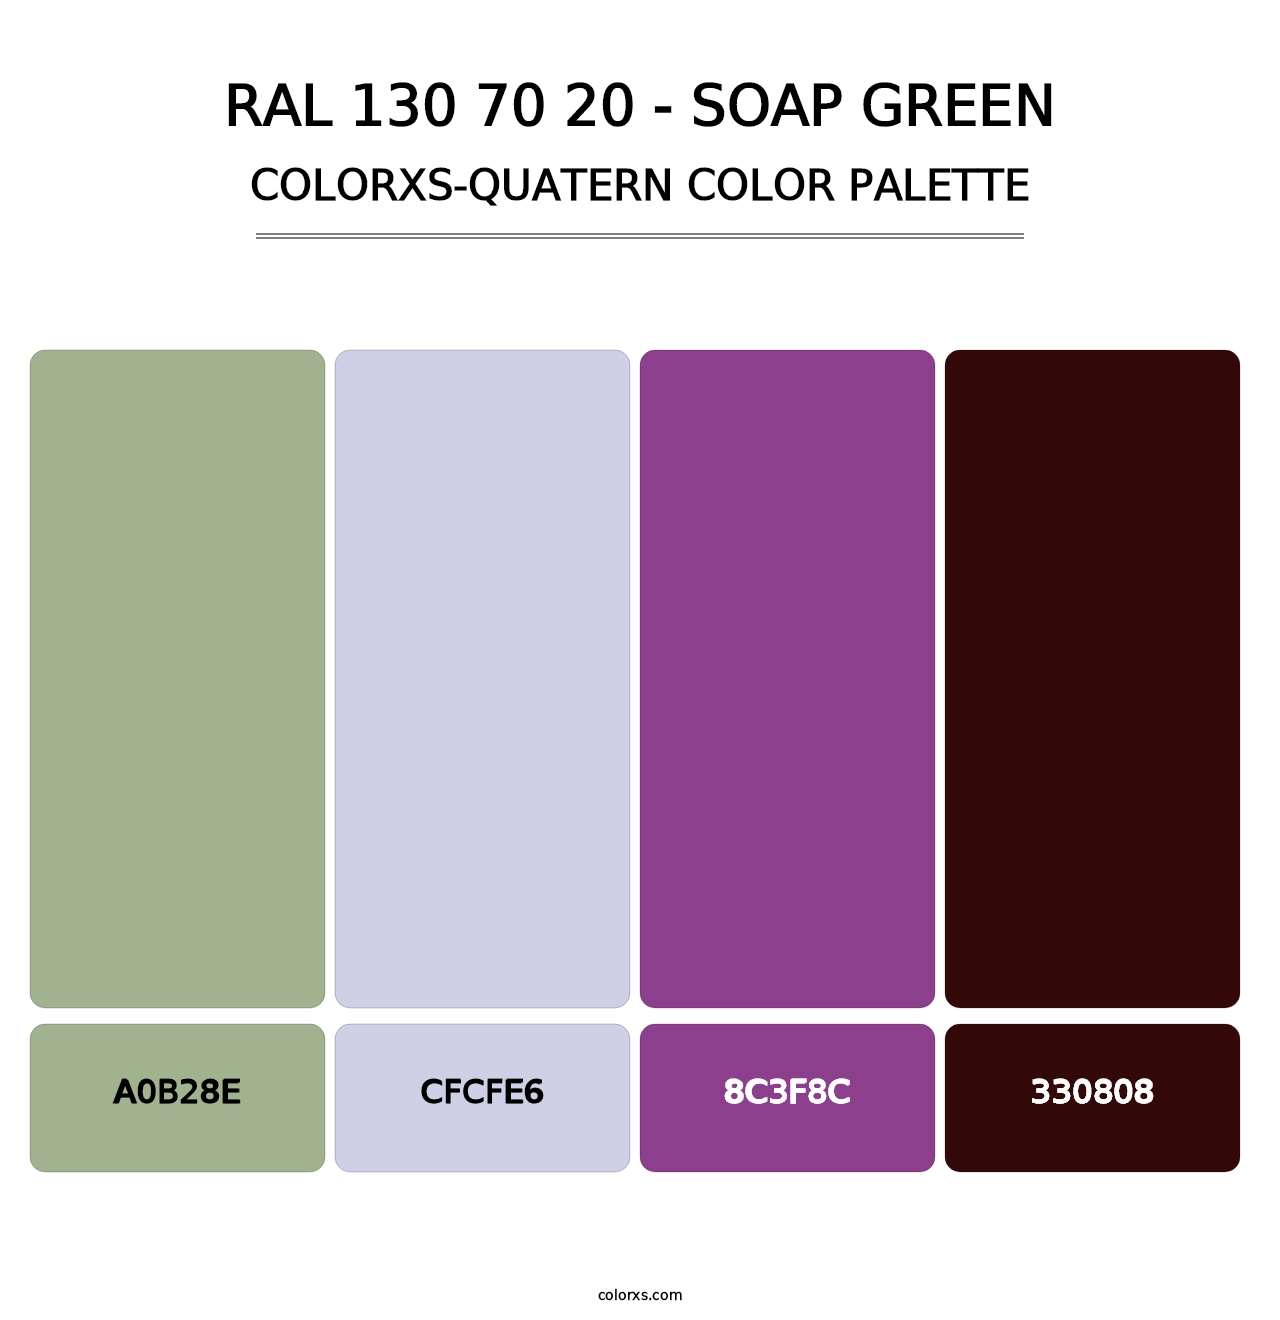 RAL 130 70 20 - Soap Green - Colorxs Quatern Palette